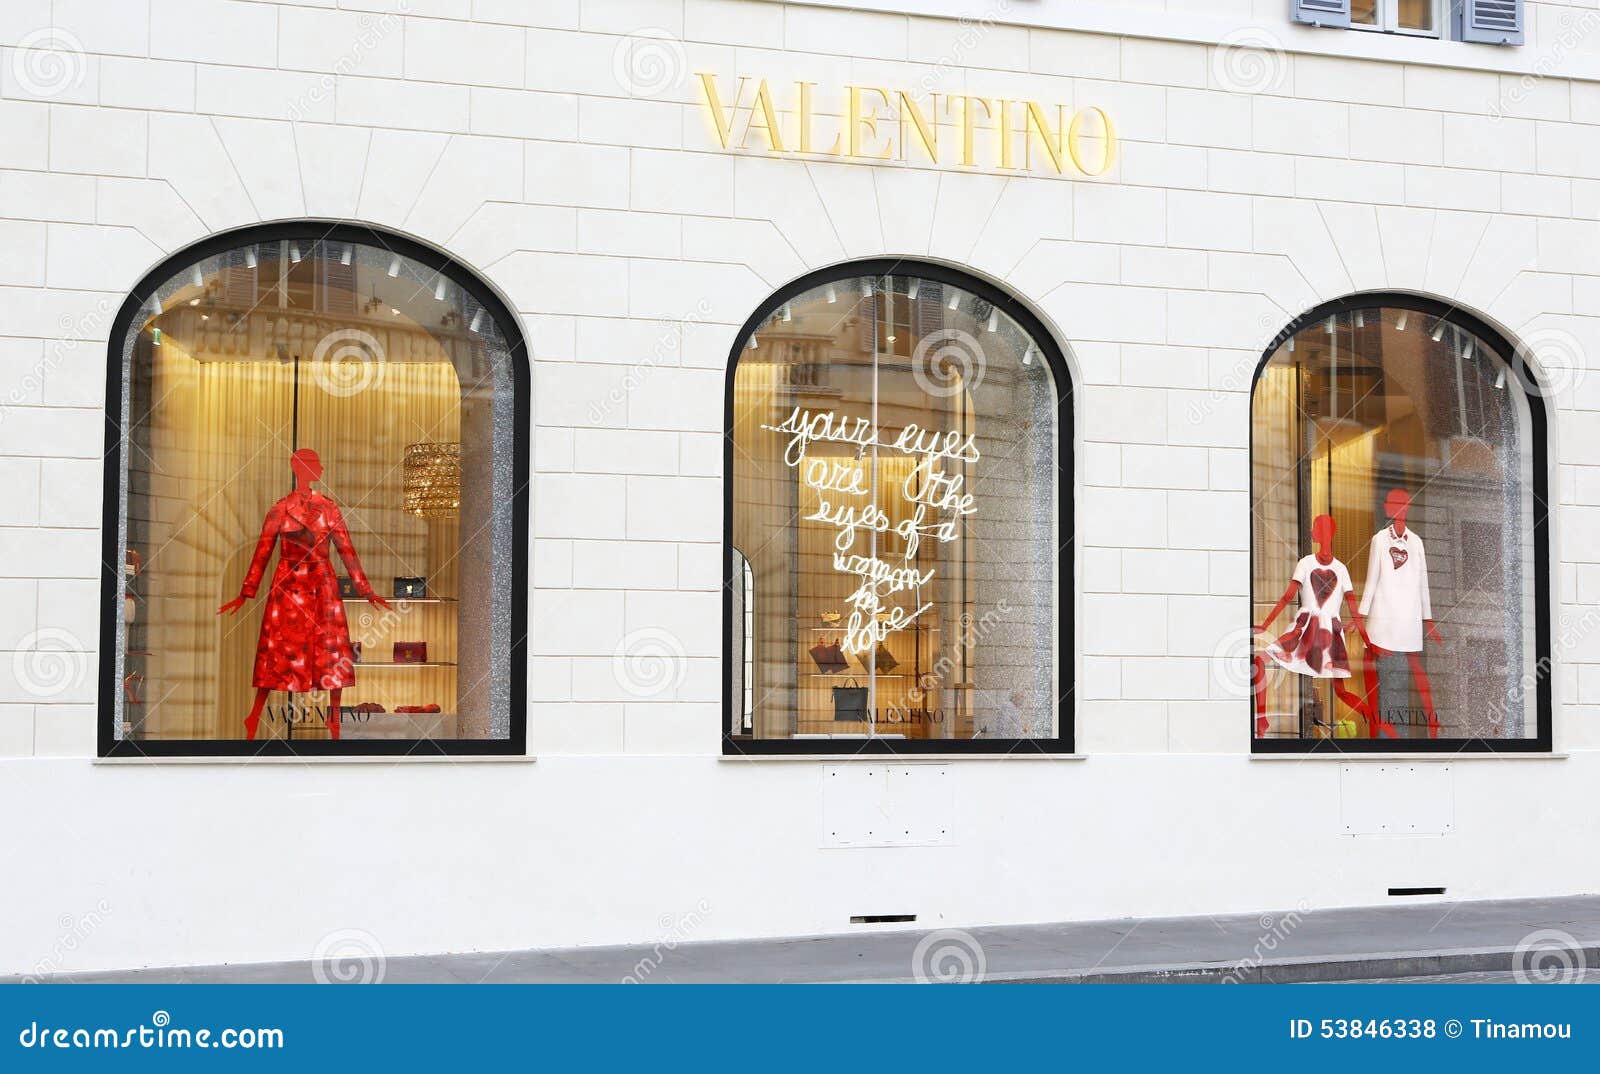 Windows of Valentino Boutique in Rome Editorial Stock Photo - of shopping: 53846338